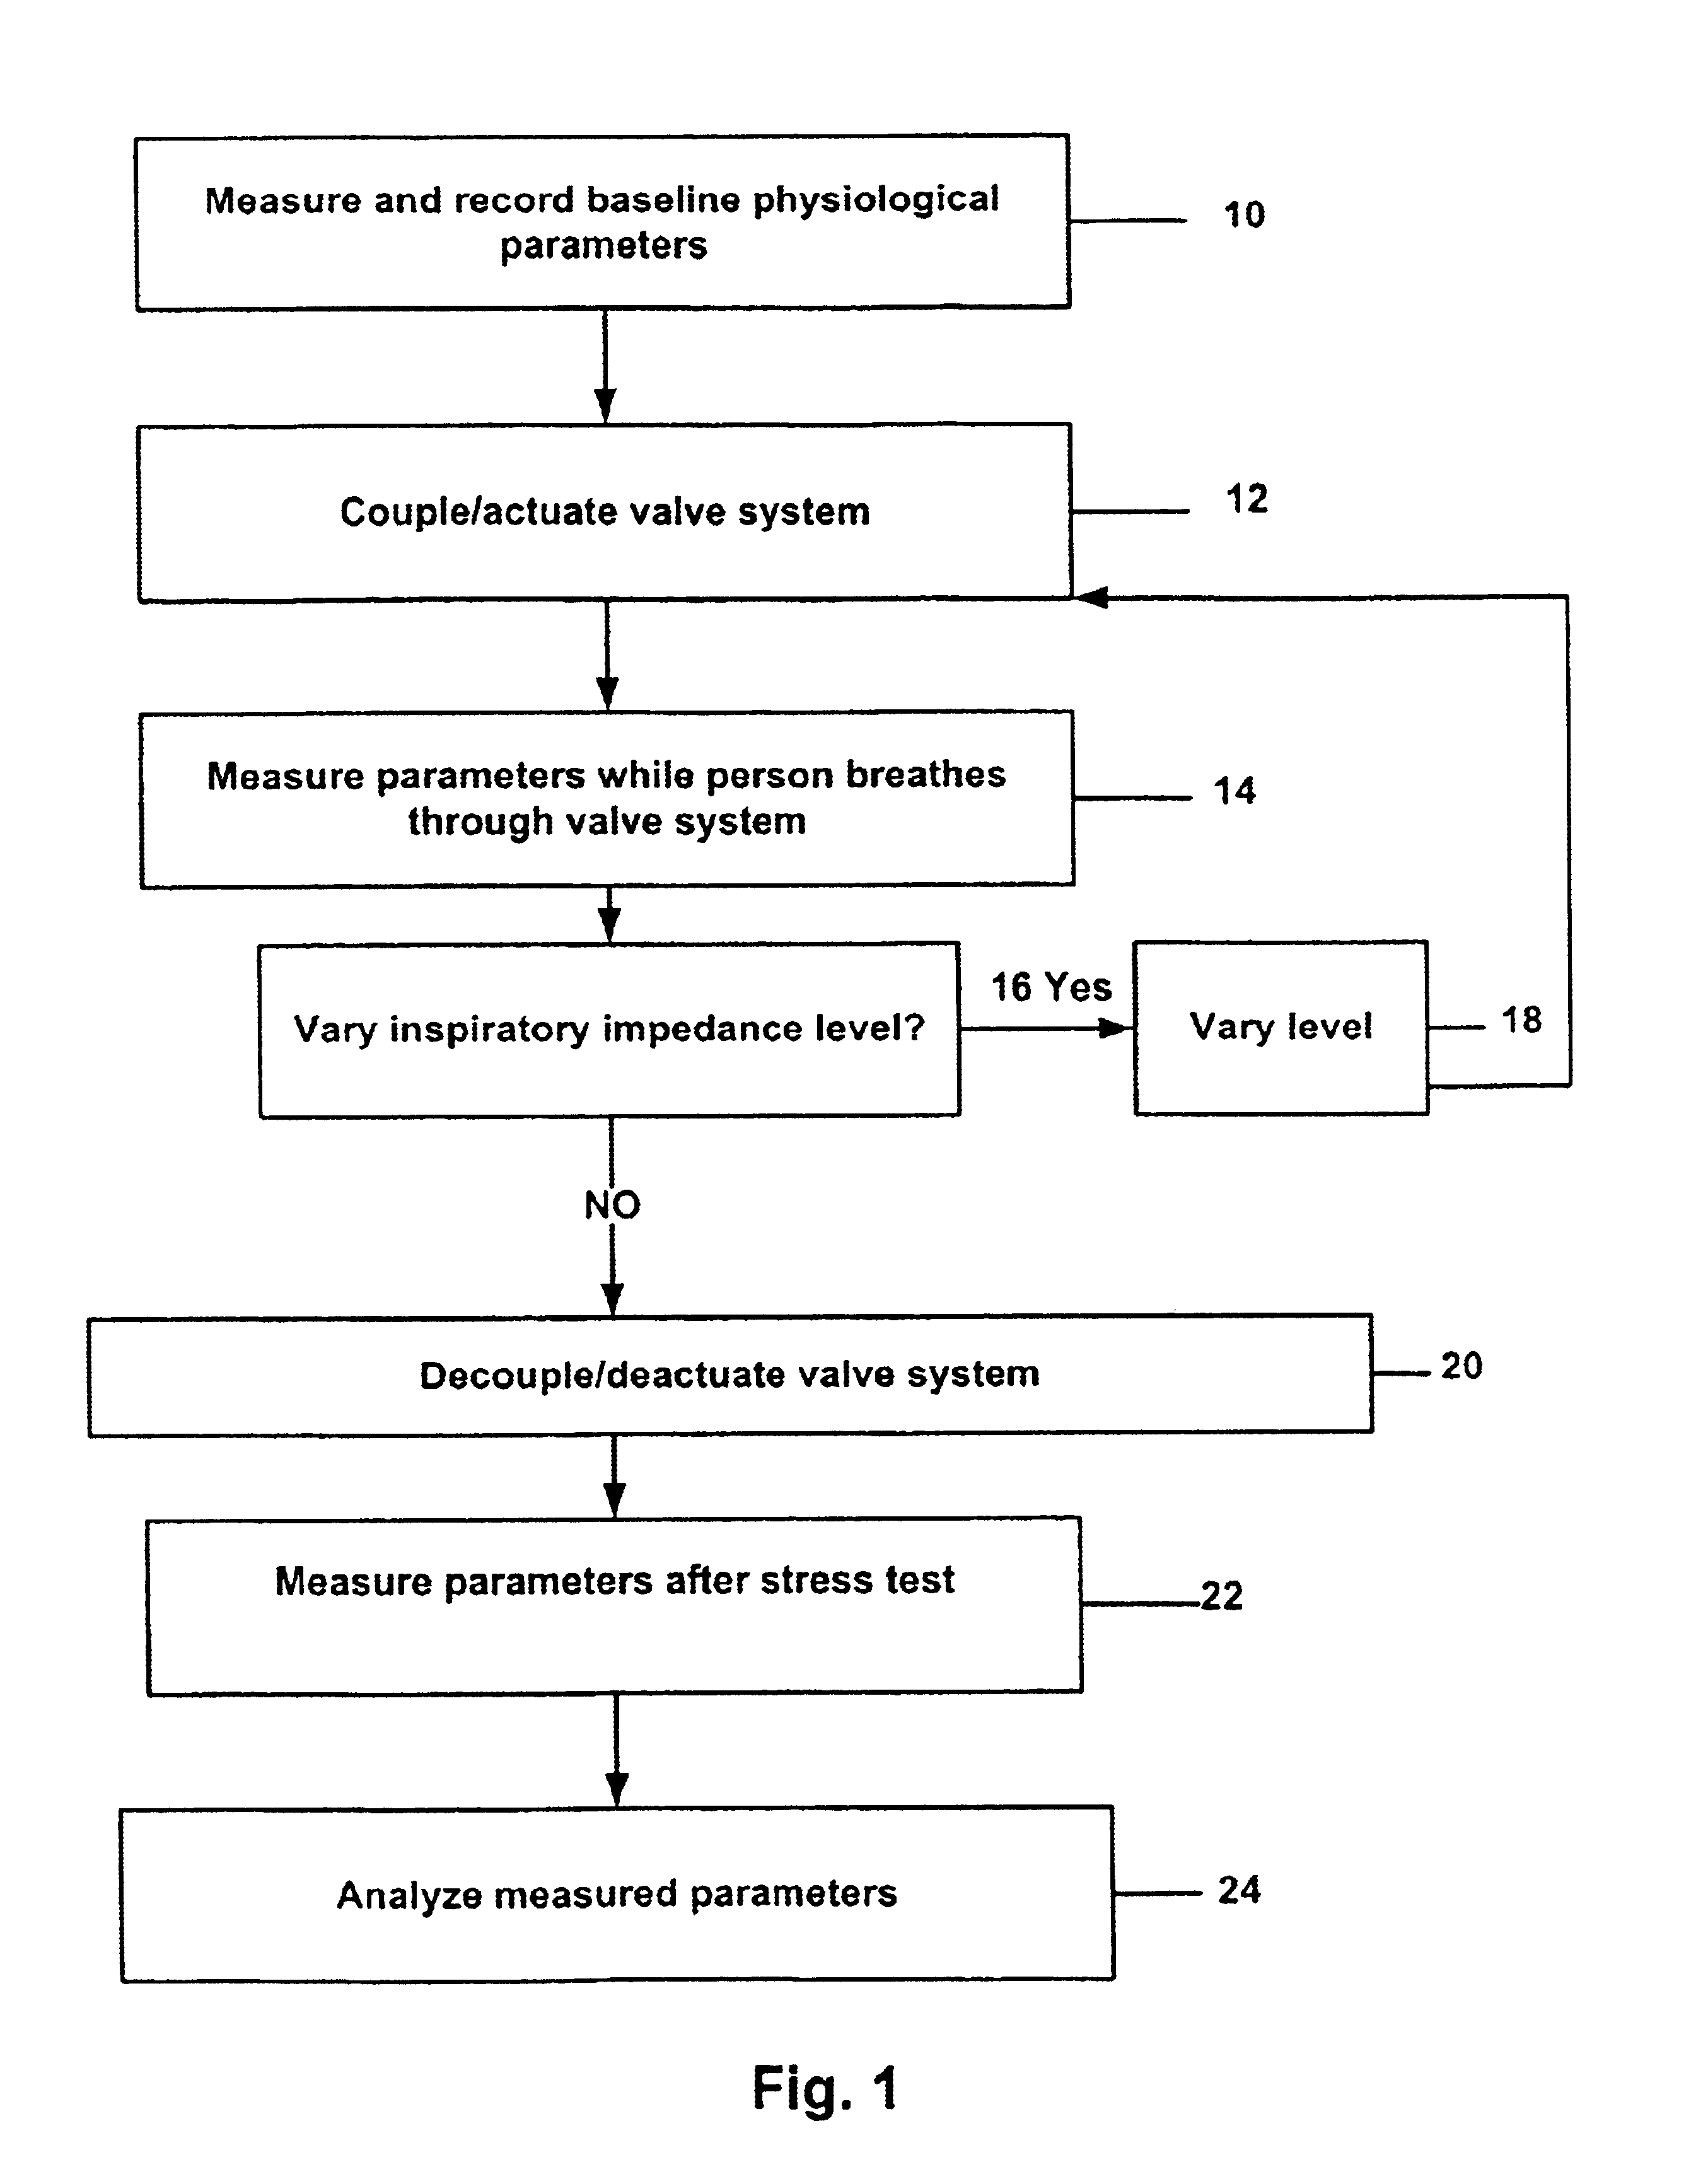 Stress test devices and methods